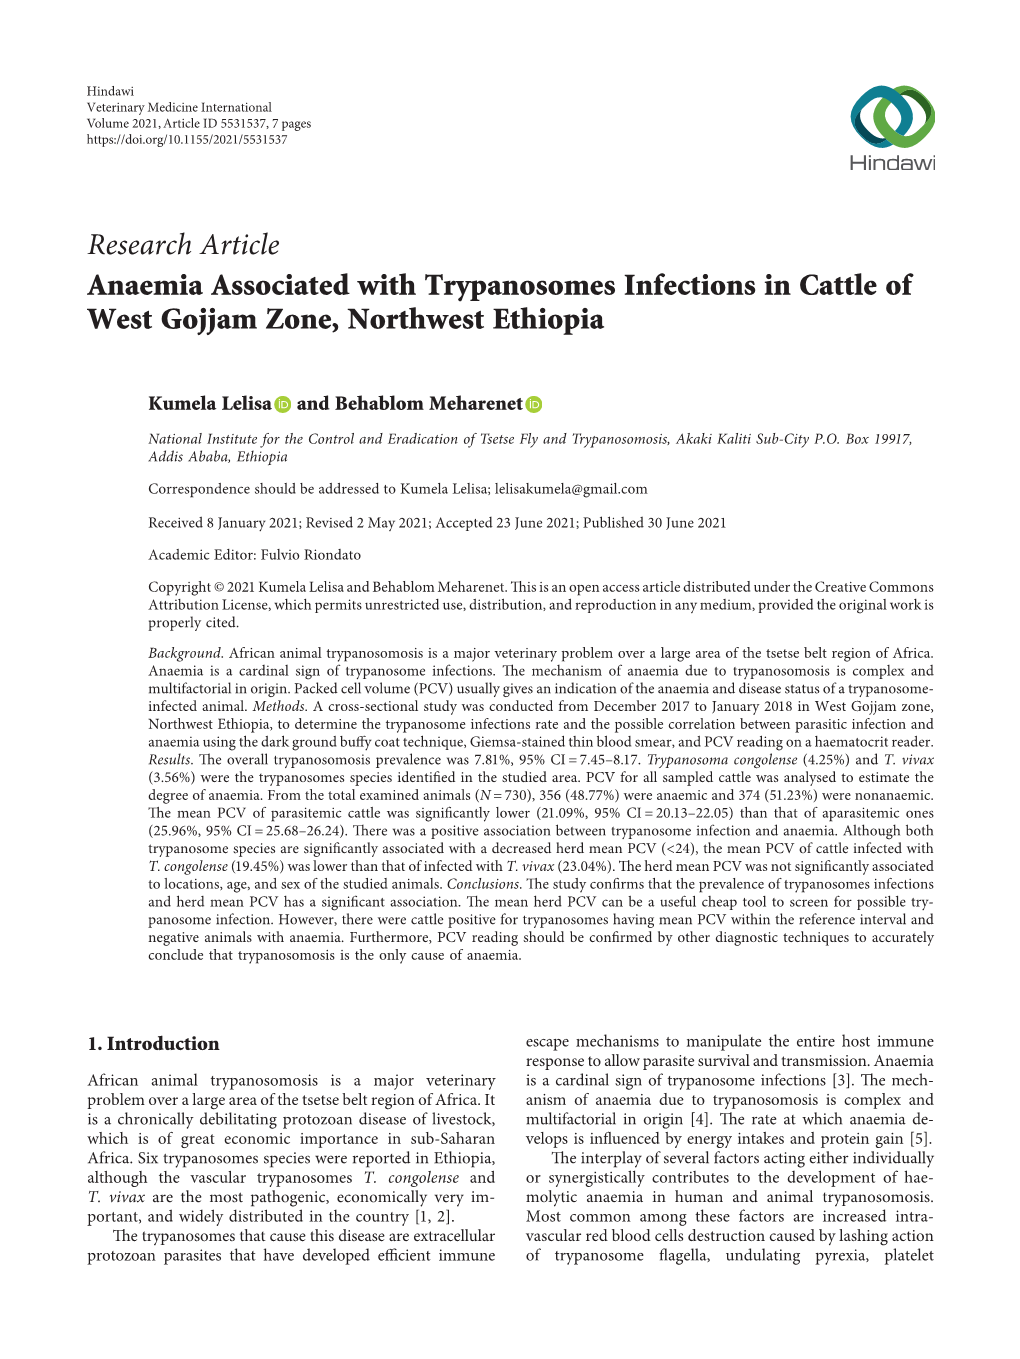 Anaemia Associated with Trypanosomes Infections in Cattle of West Gojjam Zone, Northwest Ethiopia